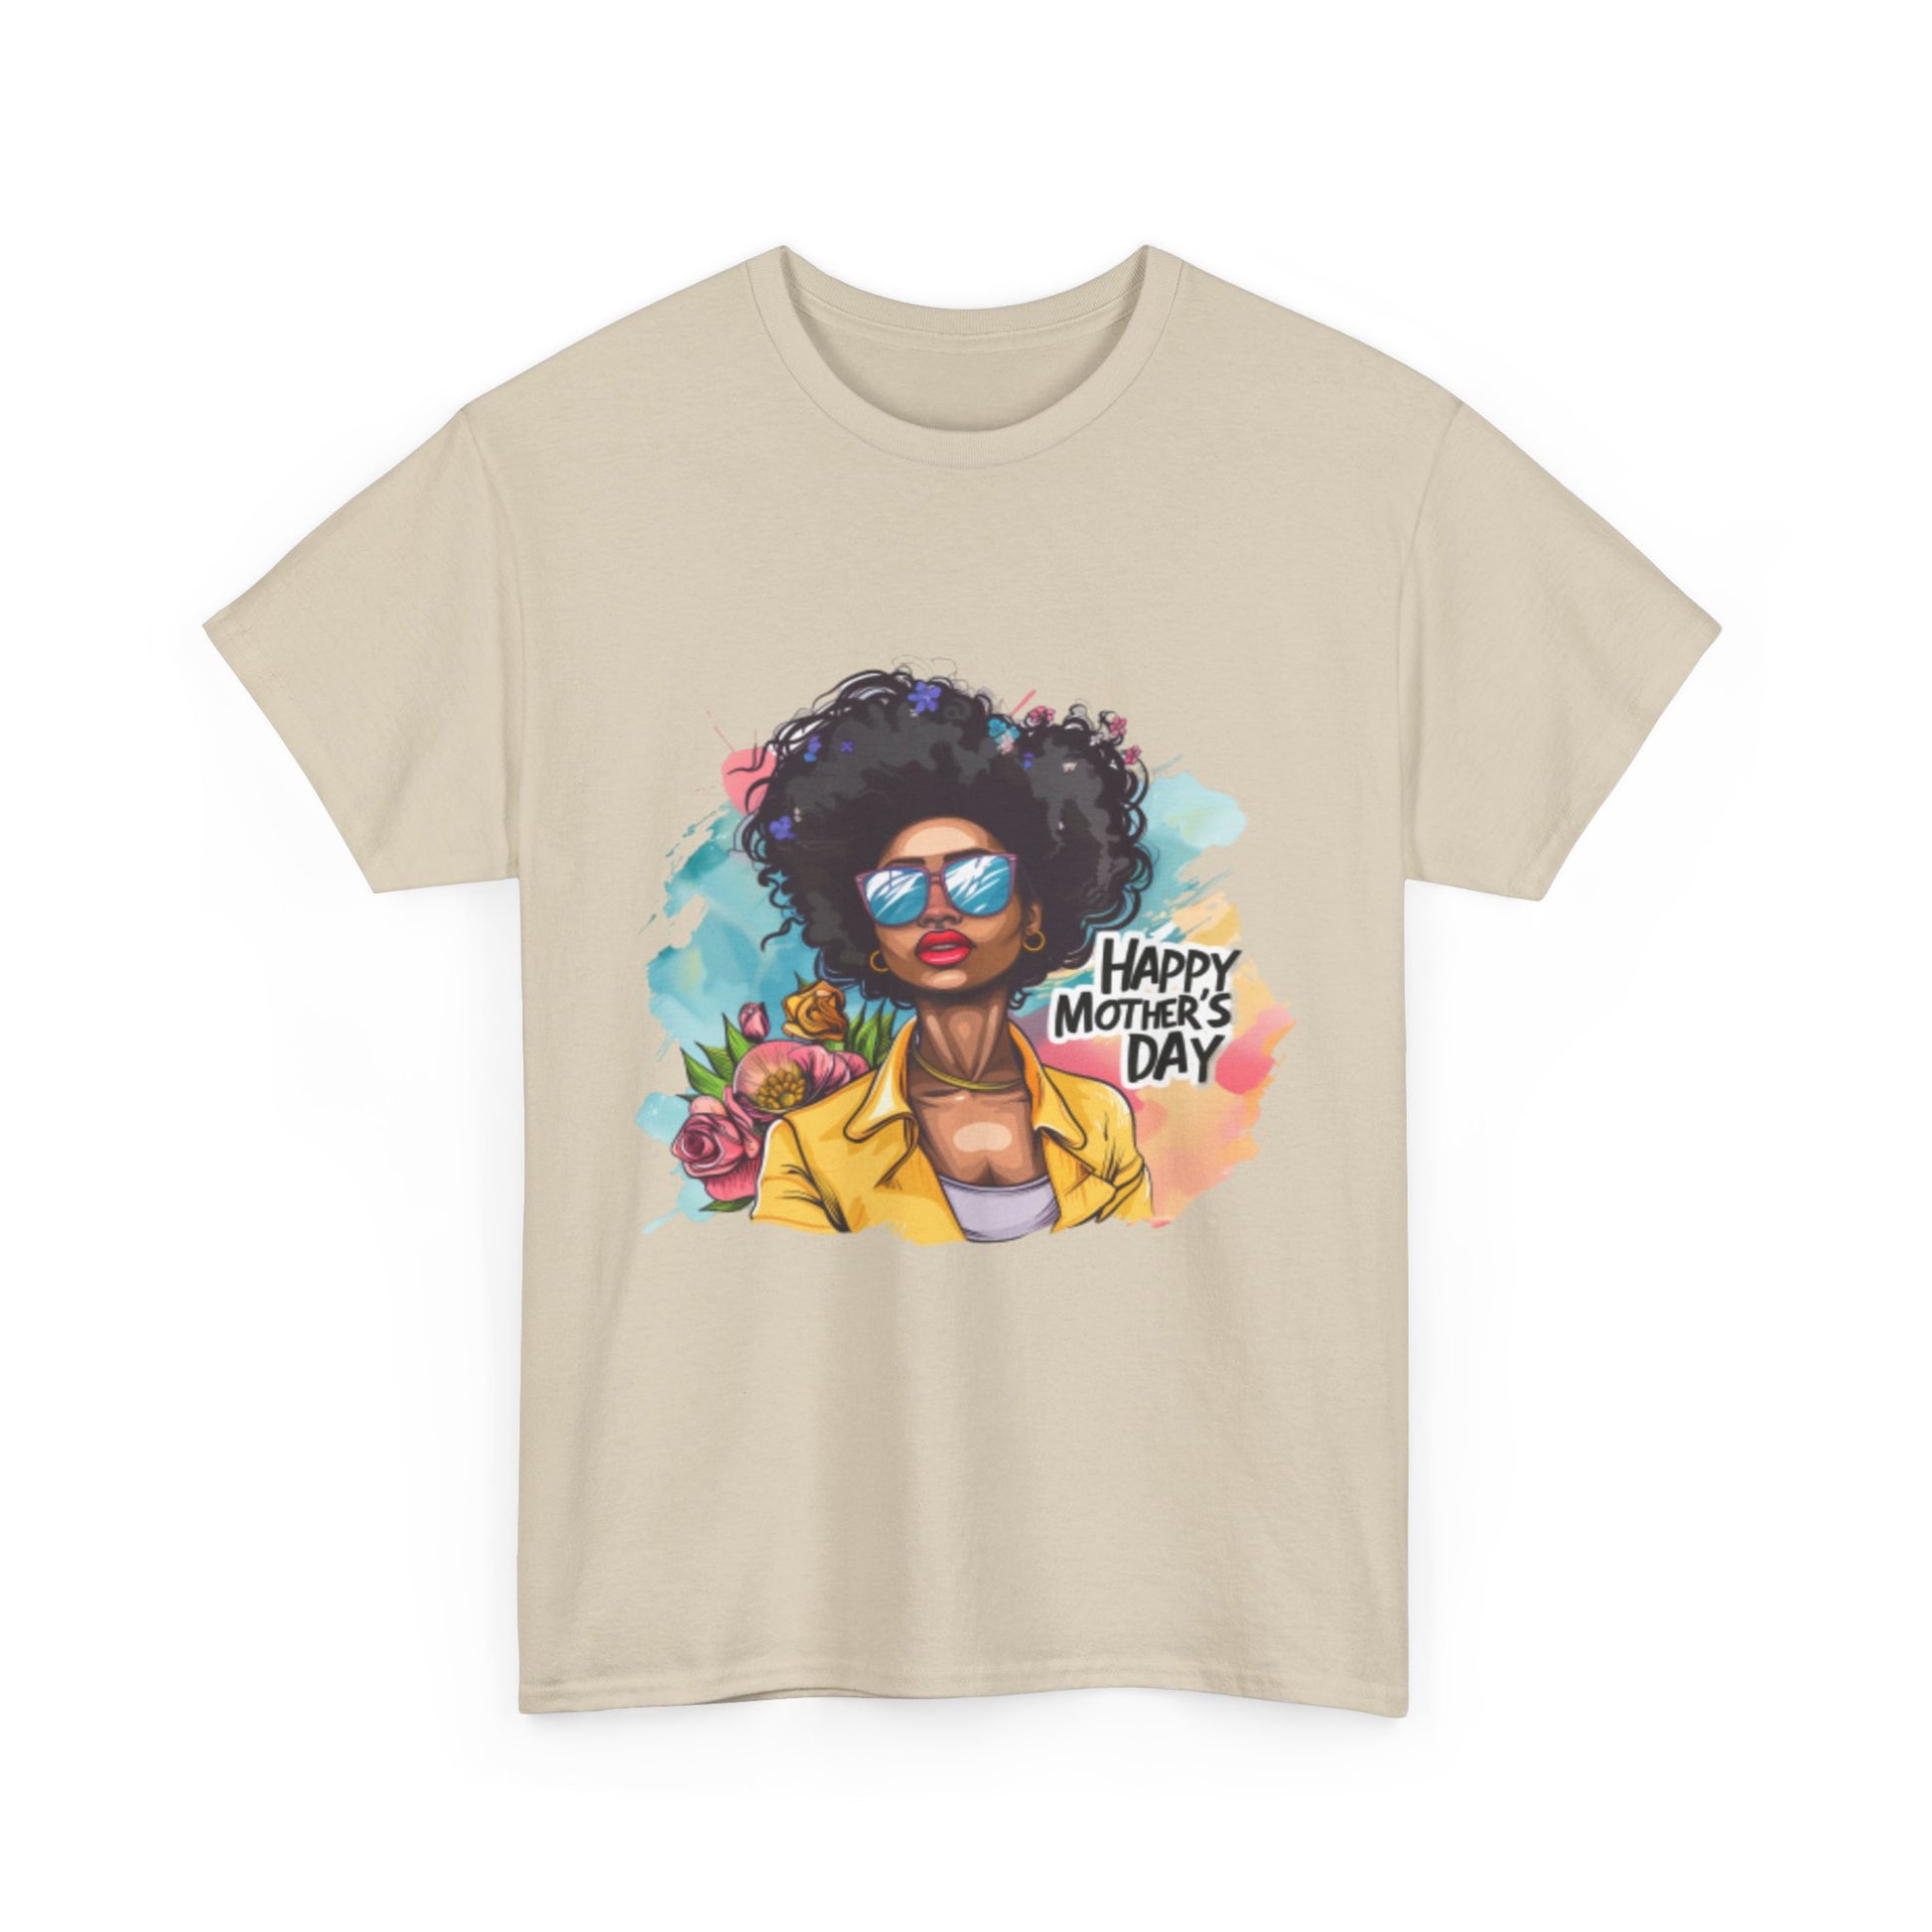 Happy Mother's Day African American Mom Graphic Unisex Heavy Cotton Tee Cotton Funny Humorous Graphic Soft Premium Unisex Men Women Sand T-shirt Birthday Gift-36